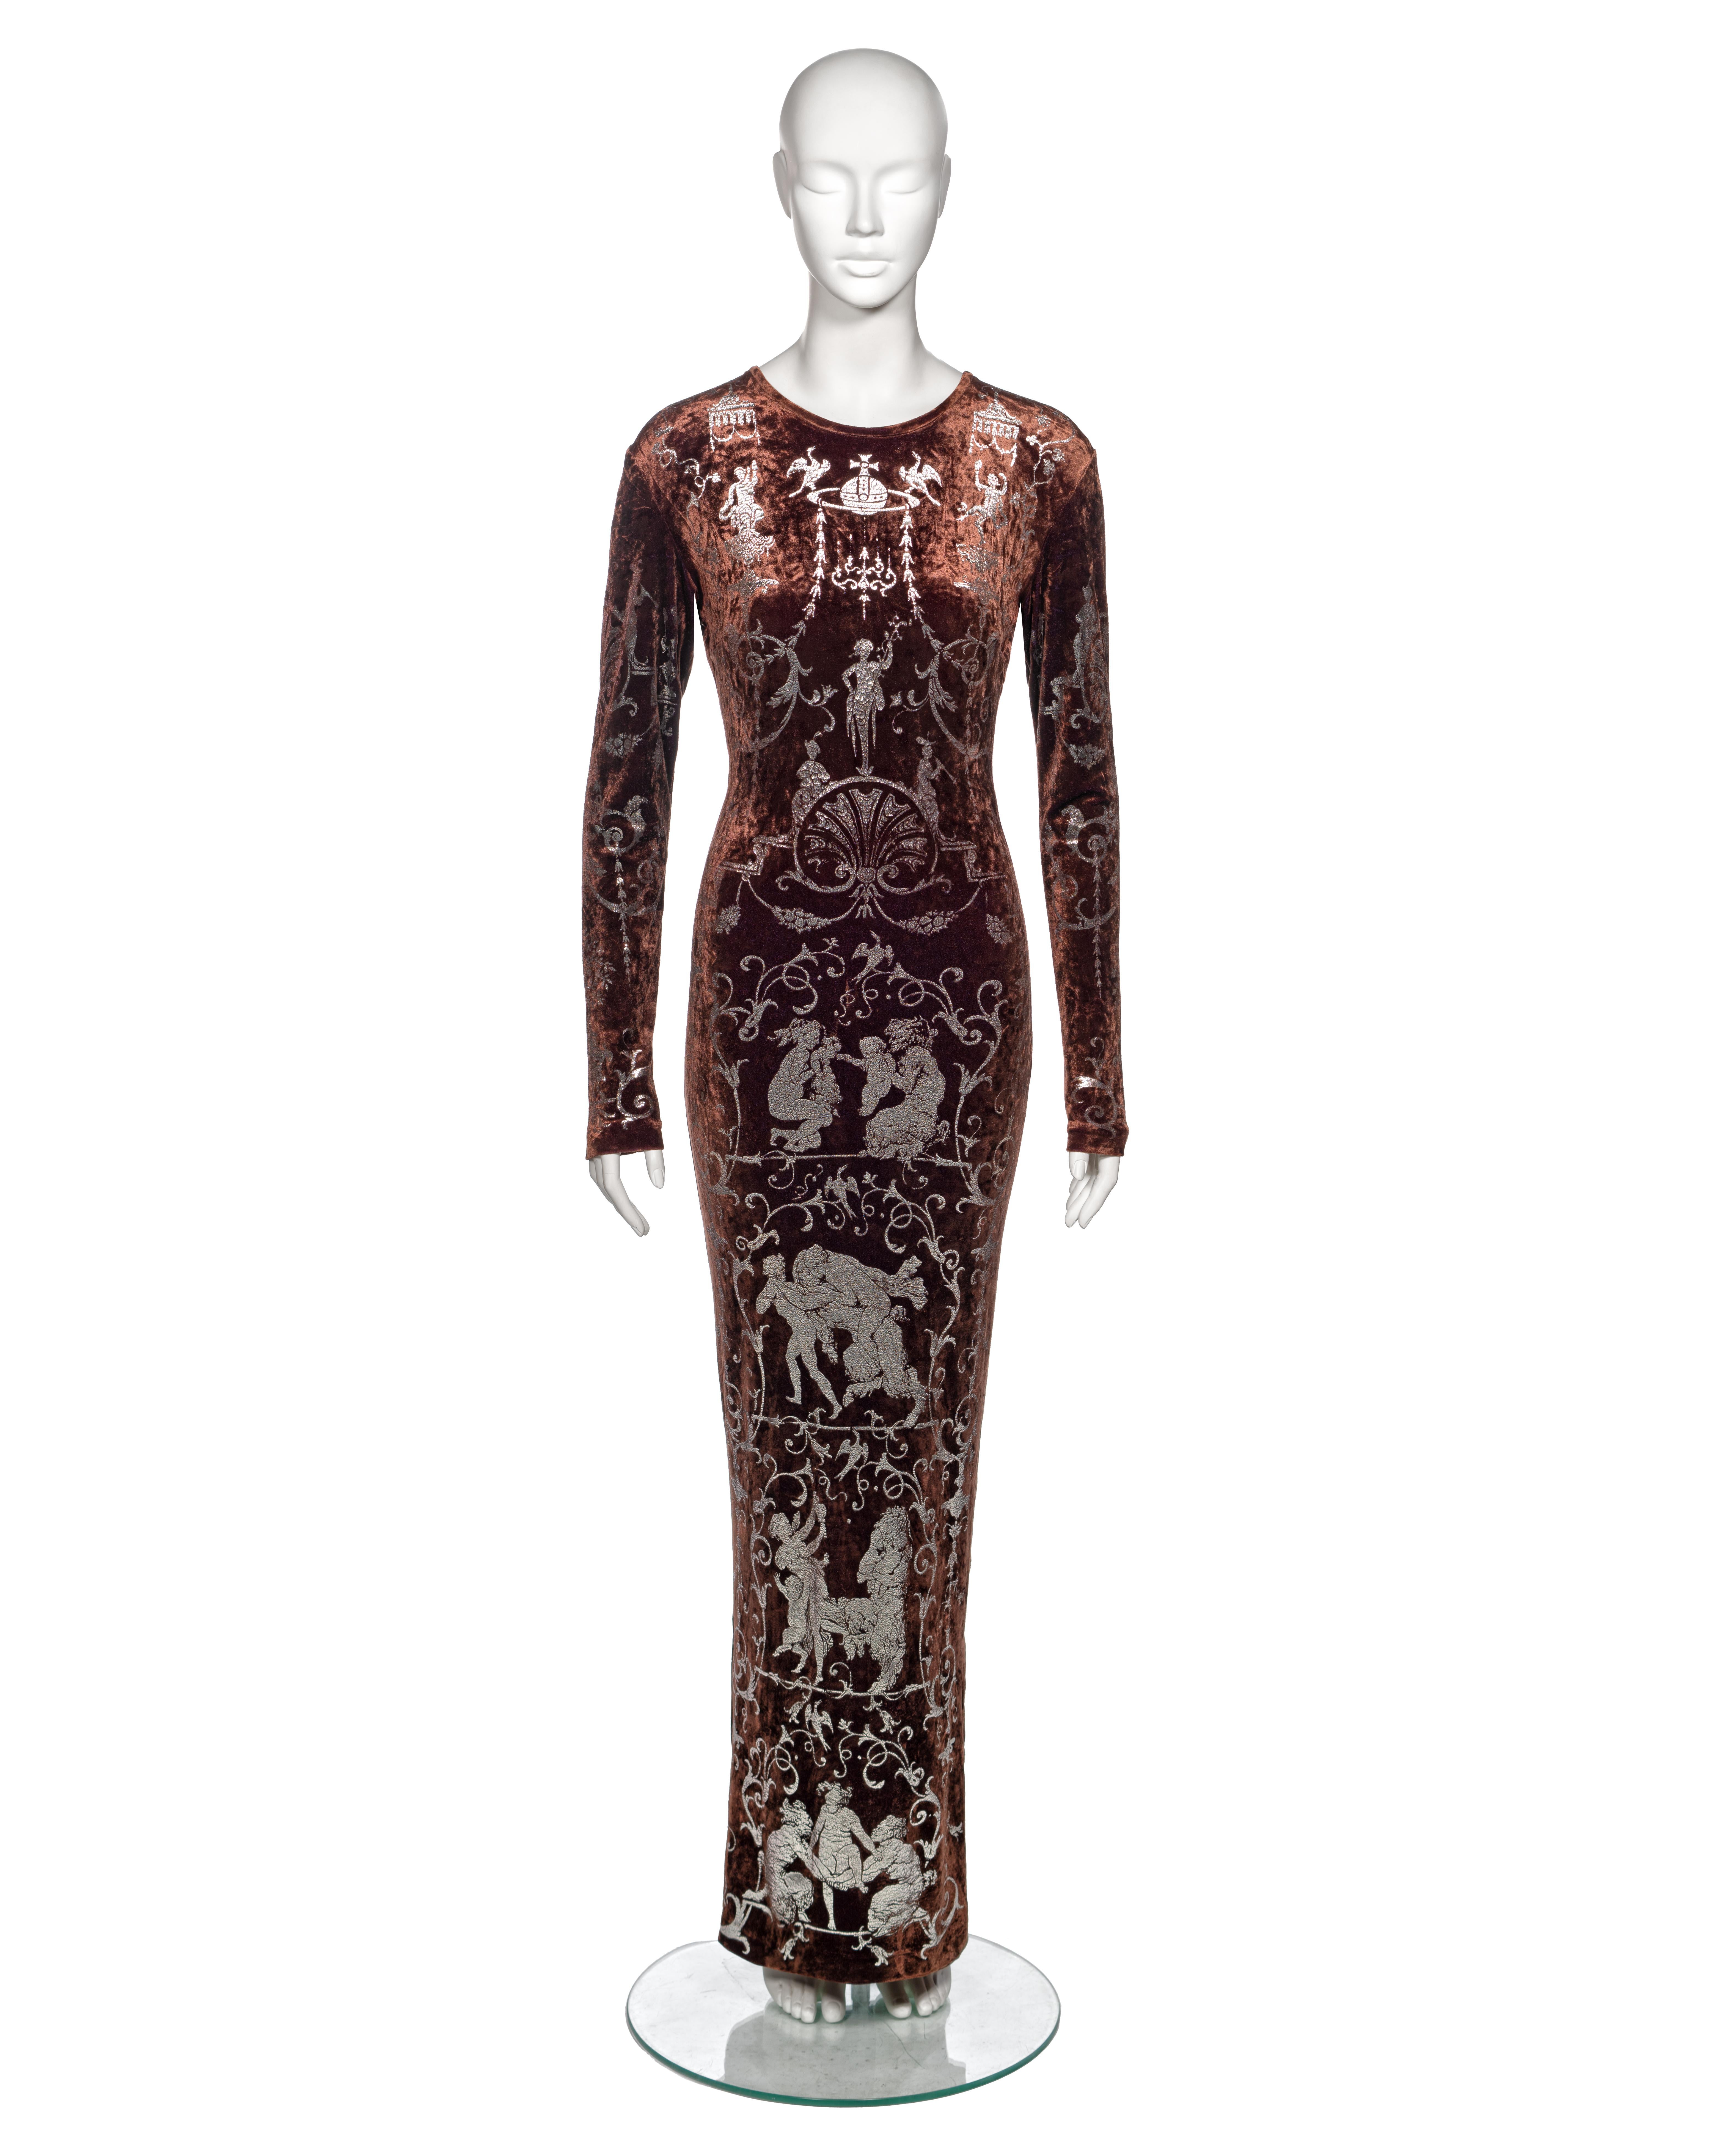 ▪ Archival Vivienne Westwood 'Portrait Collection' Evening Maxi Dress
▪ Creative Director: Vivienne Westwood
▪ Fall-Winter 1990
▪ Sold by One of a Kind Archive
▪ Museum Grade
▪ Crafted from brown crushed stretch velvet
▪ Features a silver foil print